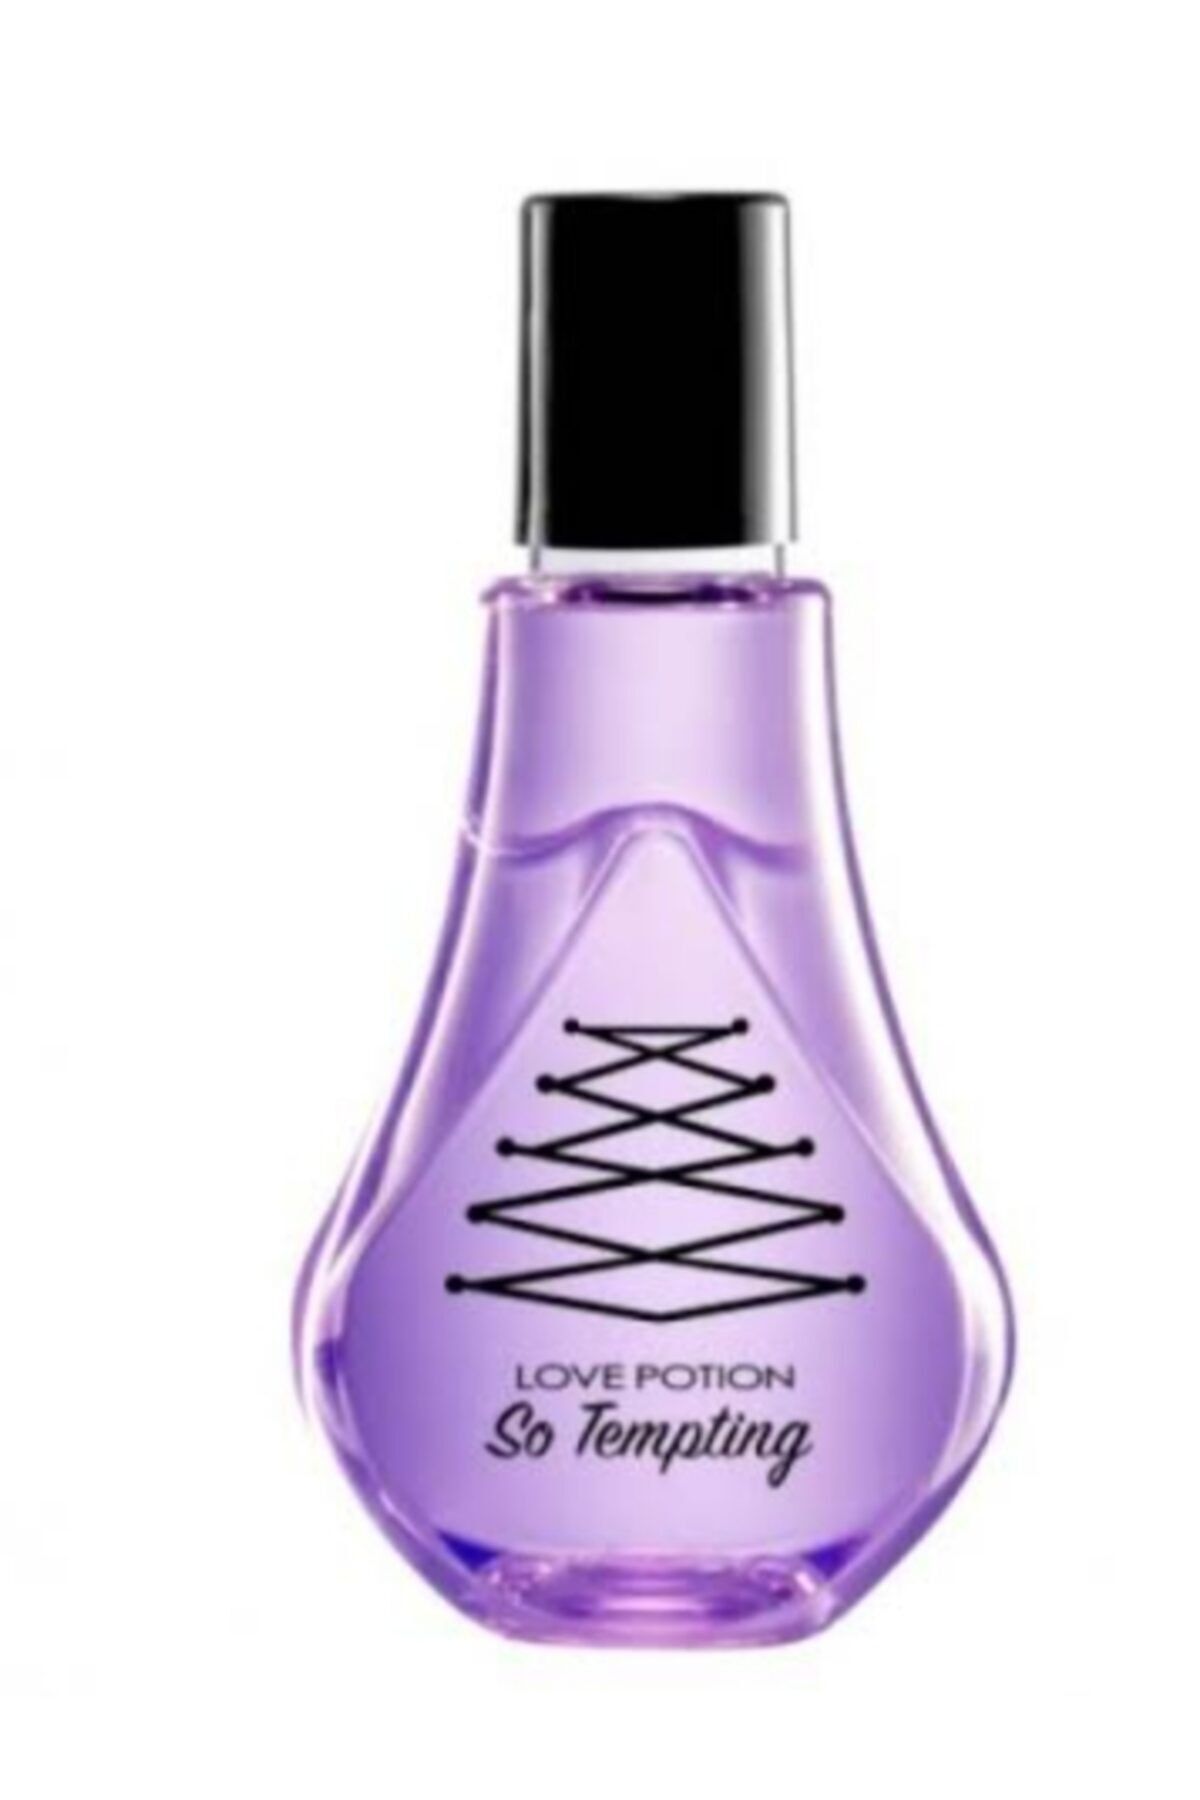 Oriflame Love Potion So Tempting